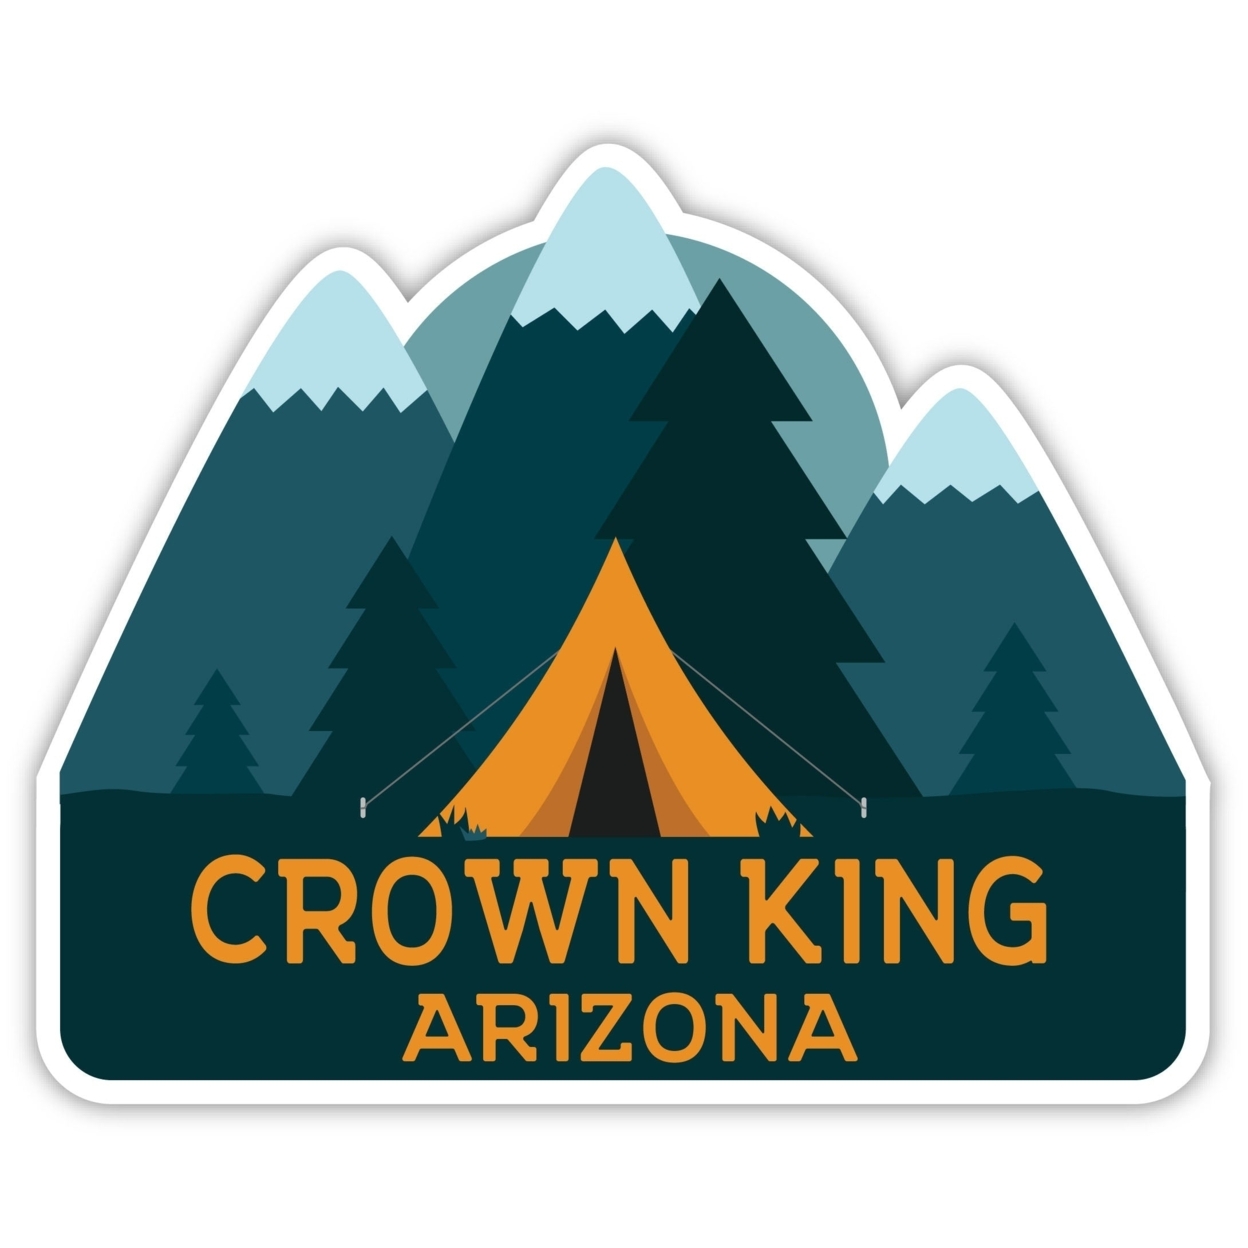 Crown King Arizona Souvenir Decorative Stickers (Choose Theme And Size) - 4-Pack, 6-Inch, Tent